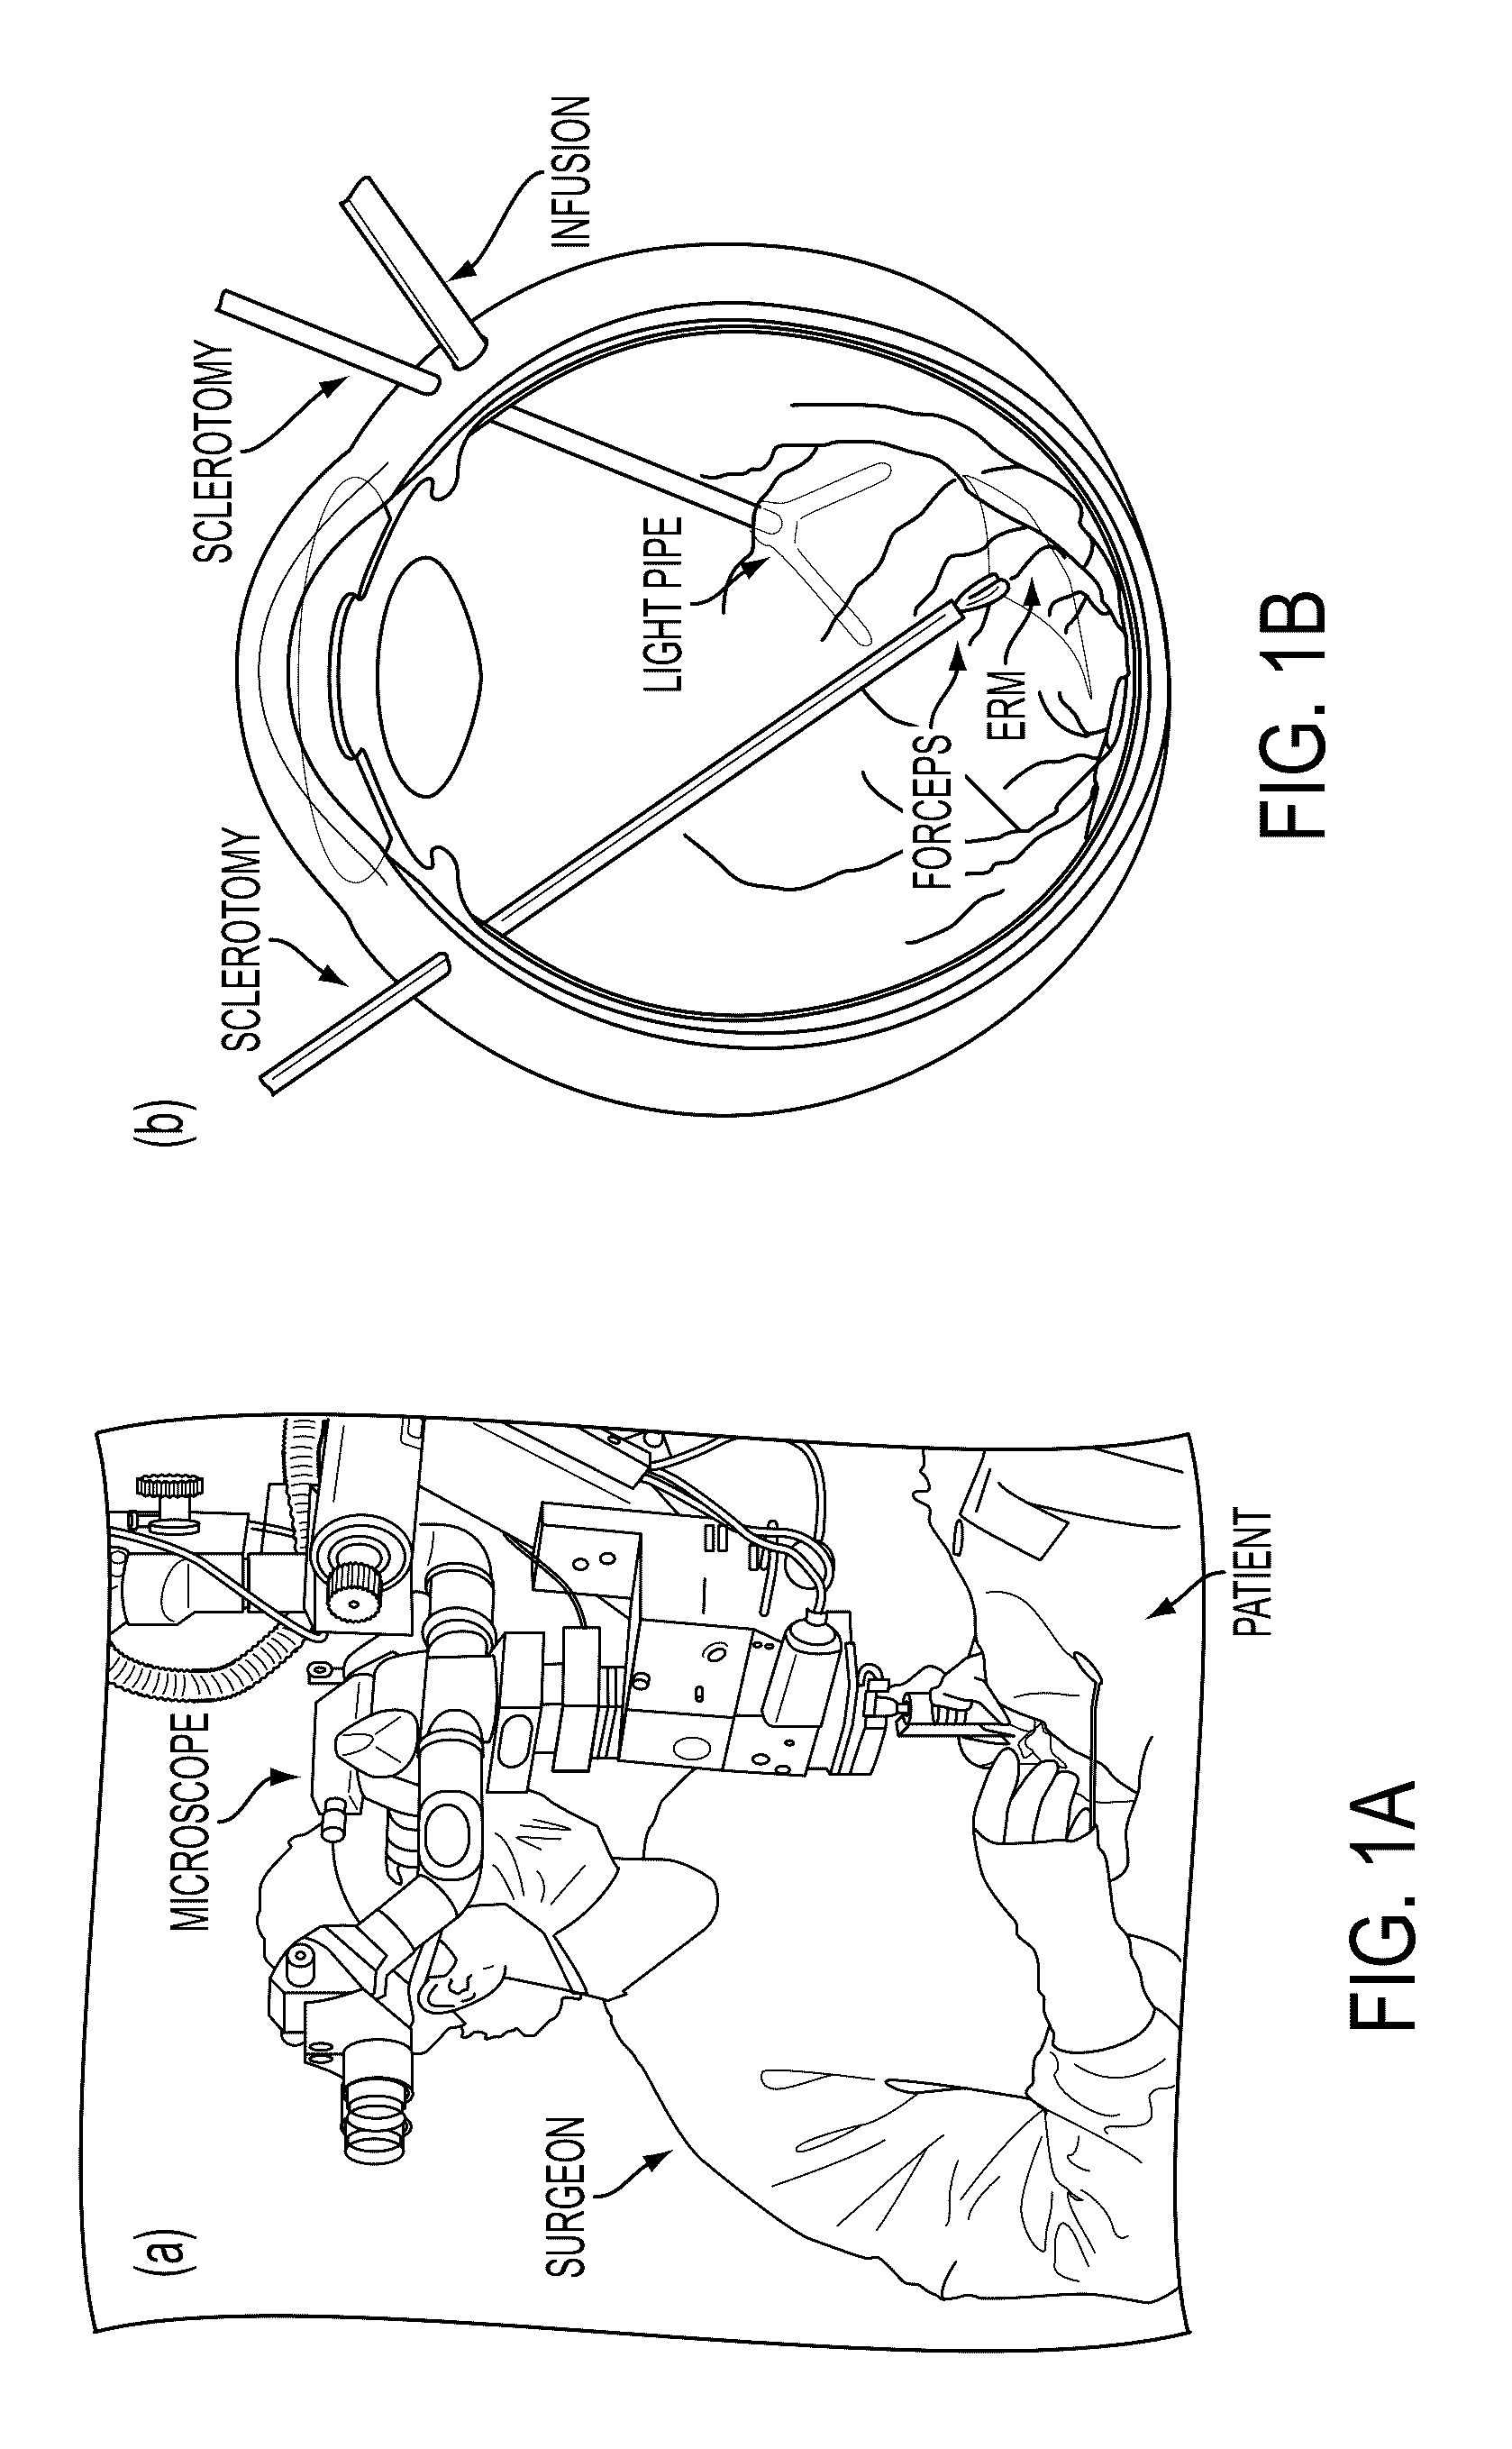 Multi-force sensing surgical instrument and method of use for robotic surgical systems